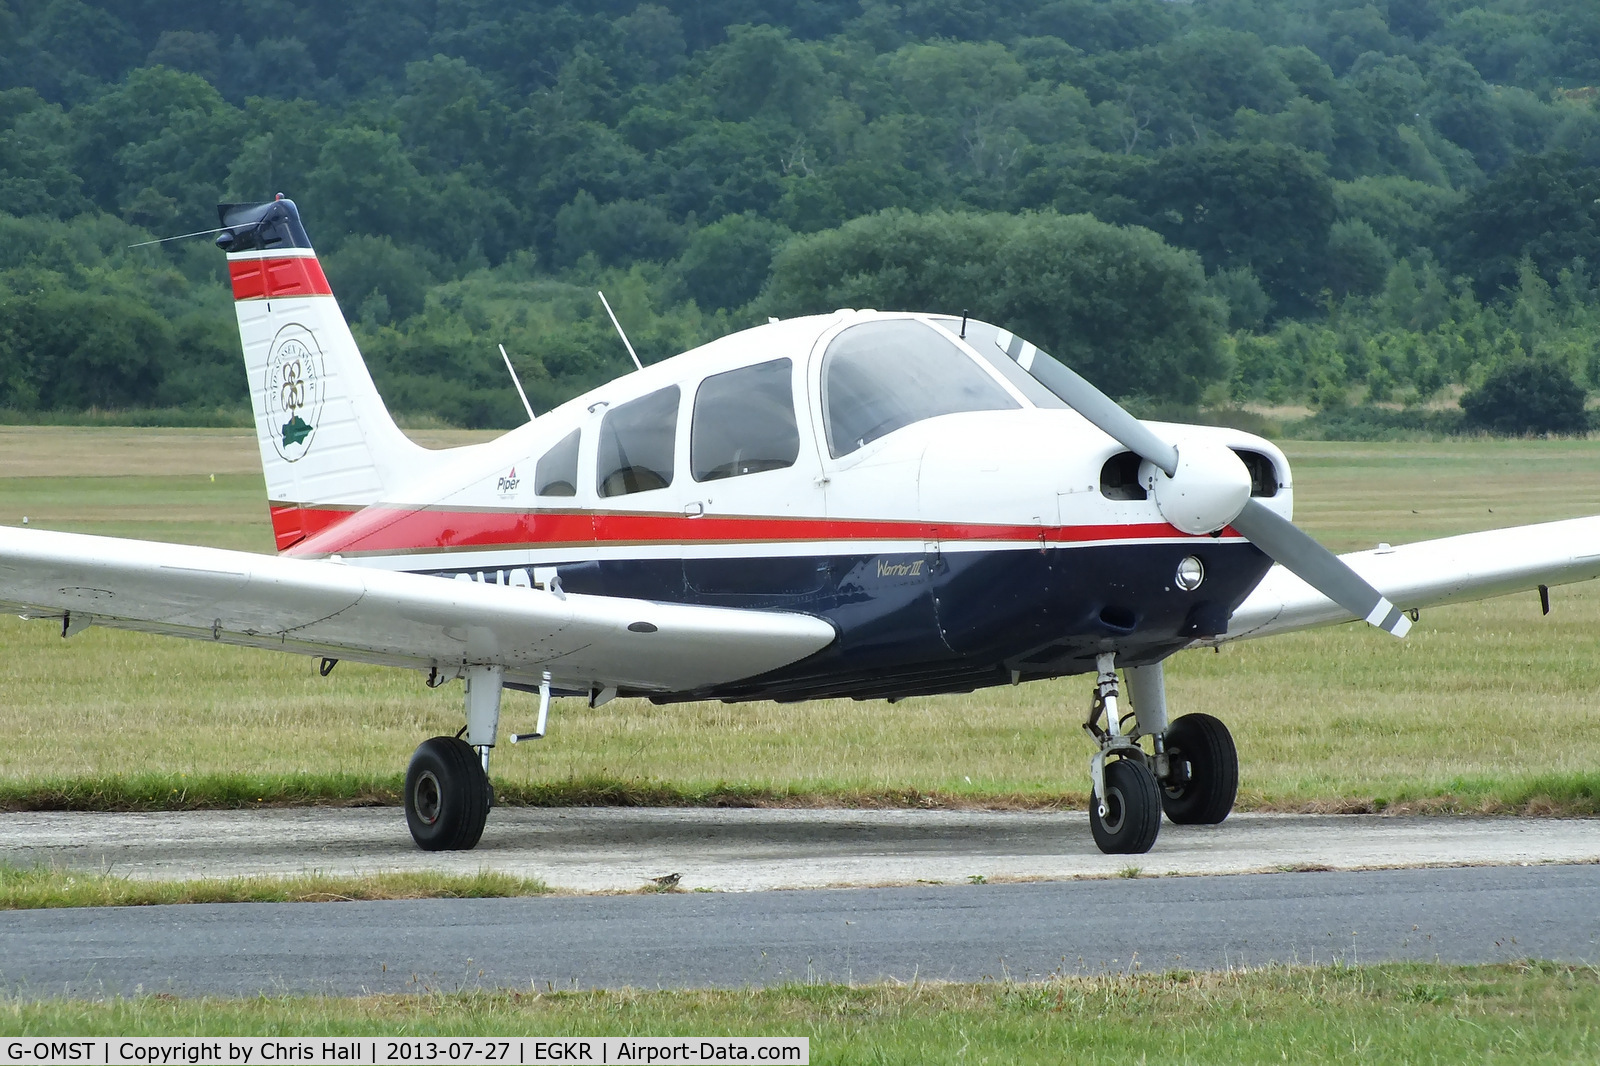 G-OMST, 2001 Piper PA-28-161 Cherokee Warrior III C/N 2842121, Mid-Sussex Timber Ltd